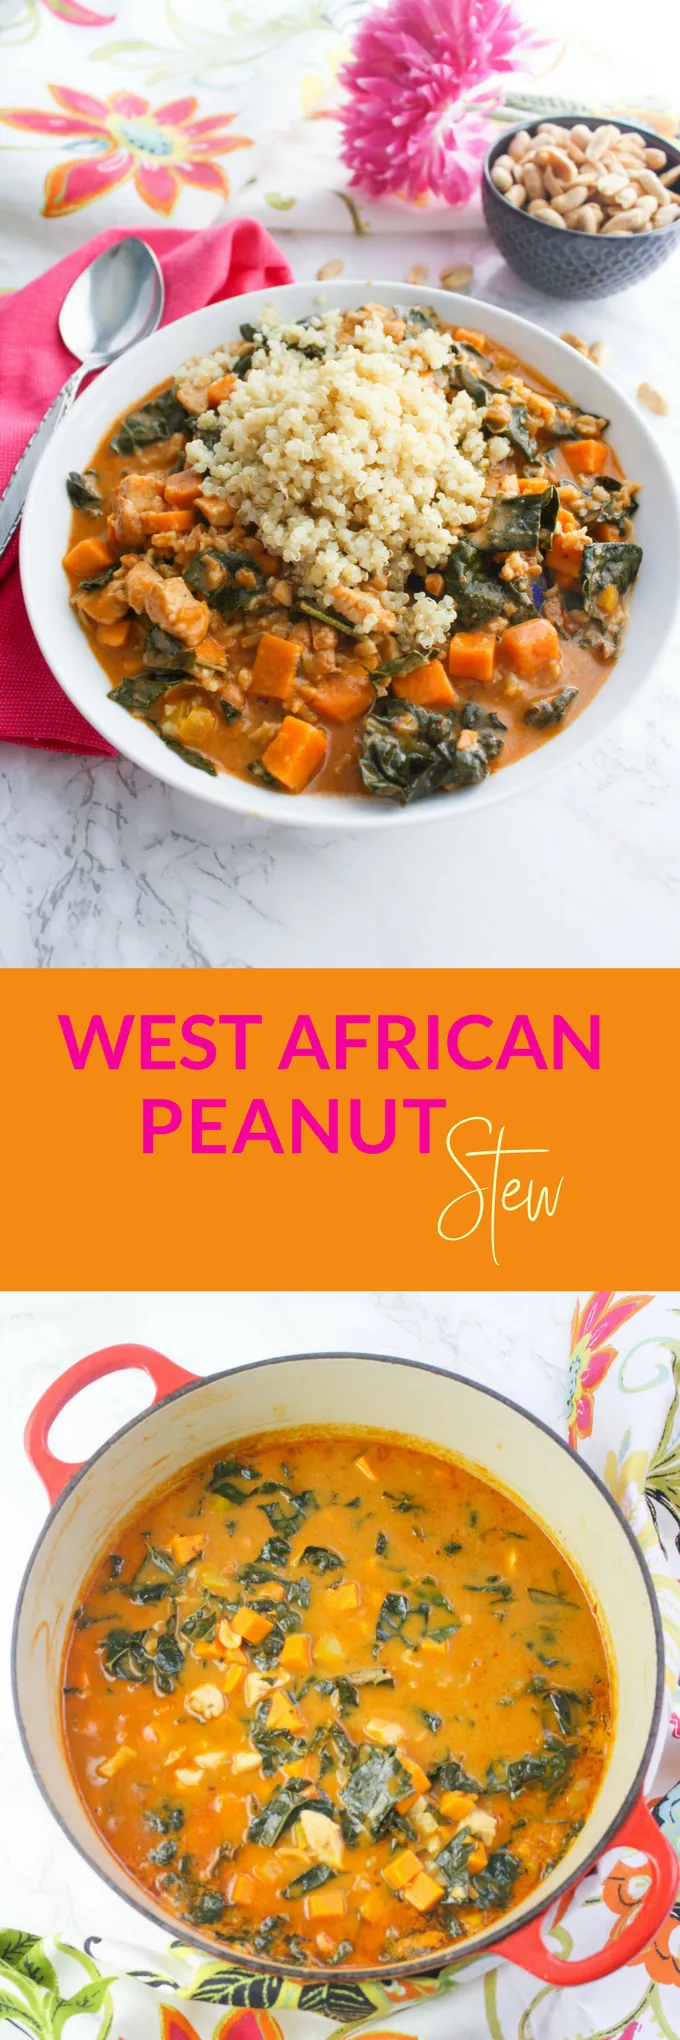 West African Peanut Stew is a delicious stew you need to make soon! What a treat West African Peanut Stew is for the senses!